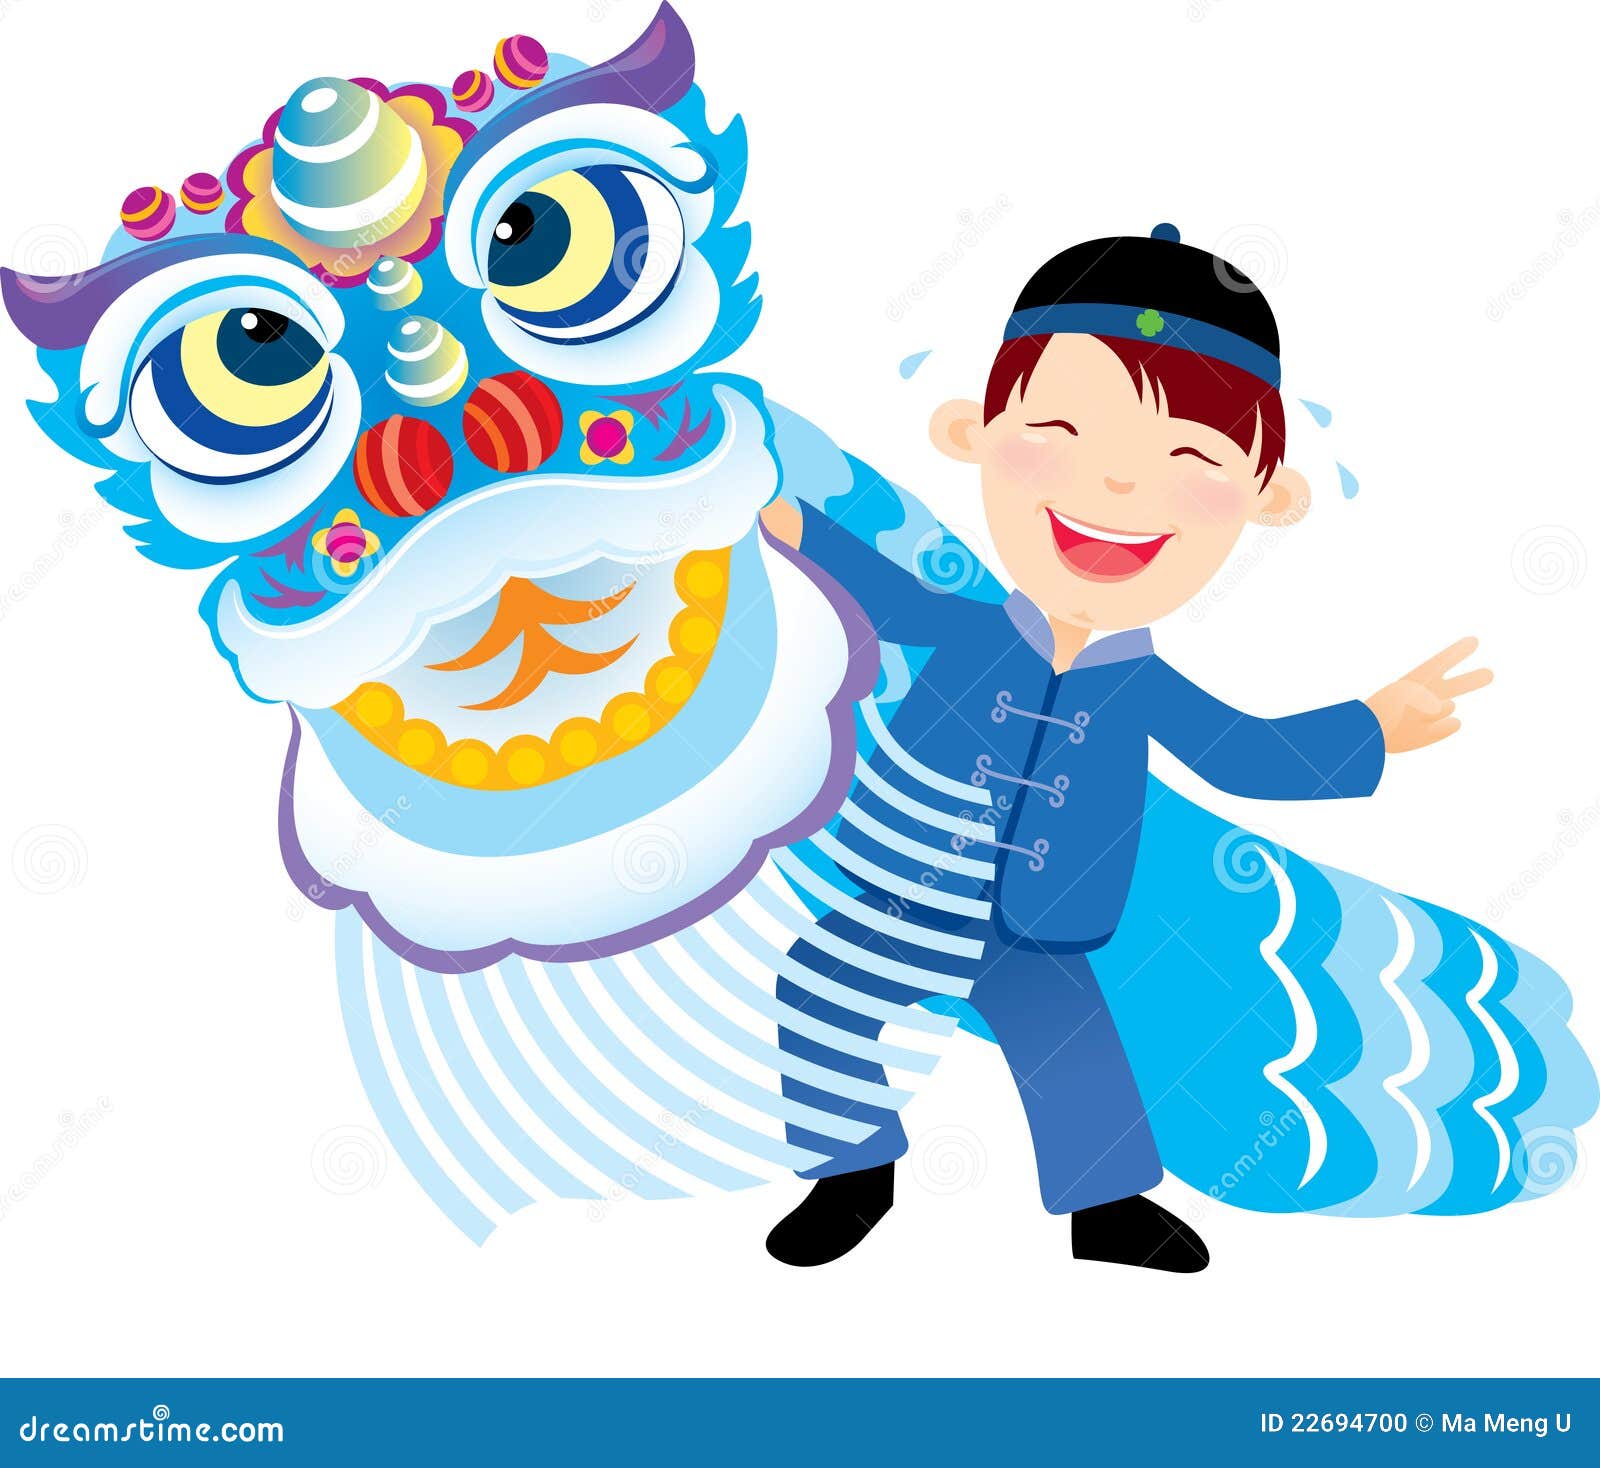 Kid Playing The Chinese Lion Dance Stock Photo - Image: 22694700